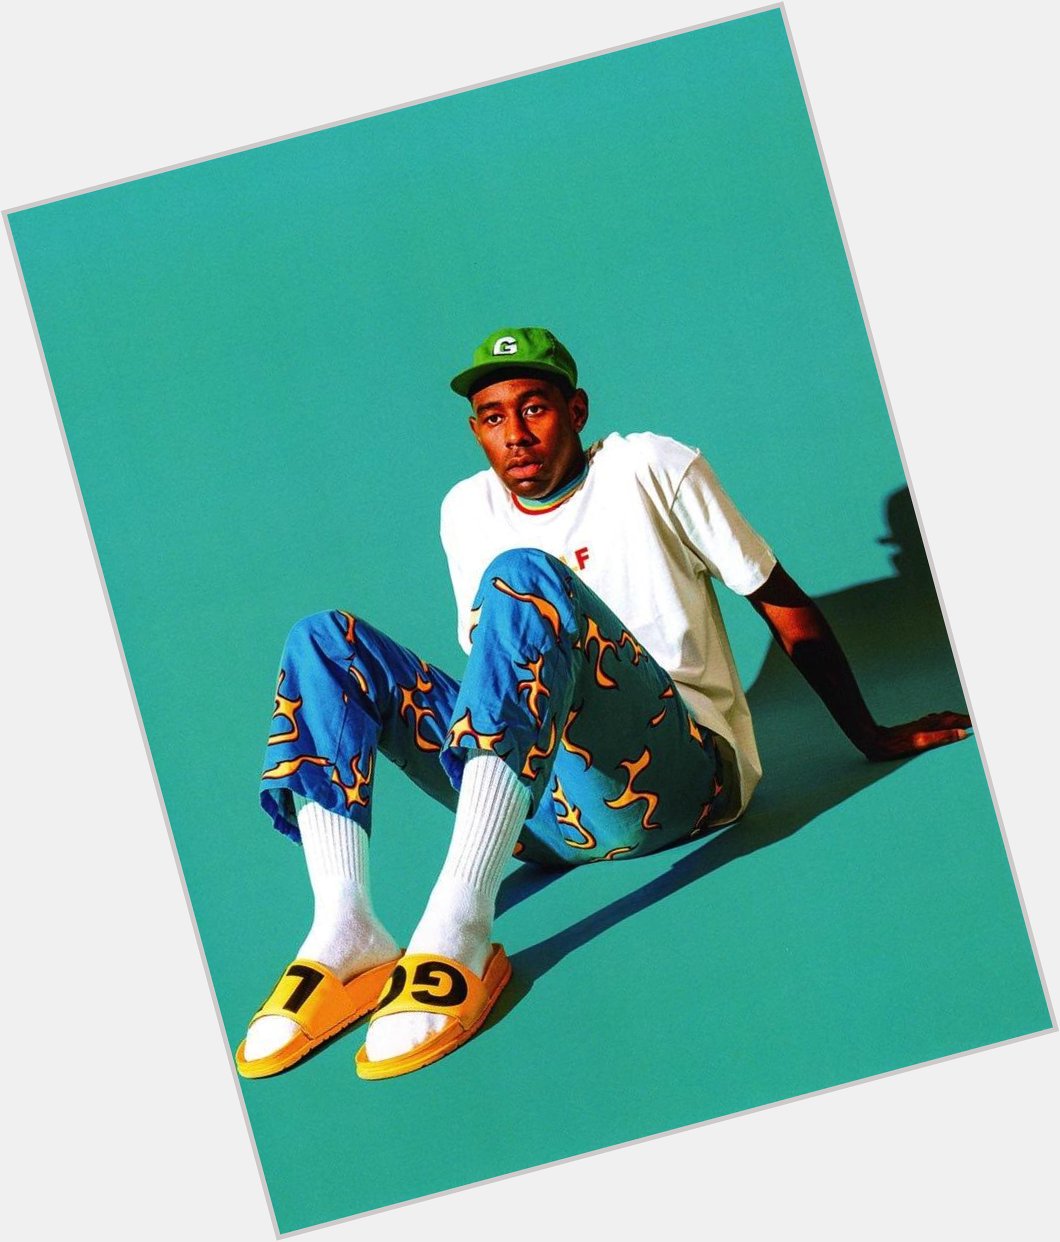 Happy Birthday to the GOAT himself - Tyler, The Creator! 